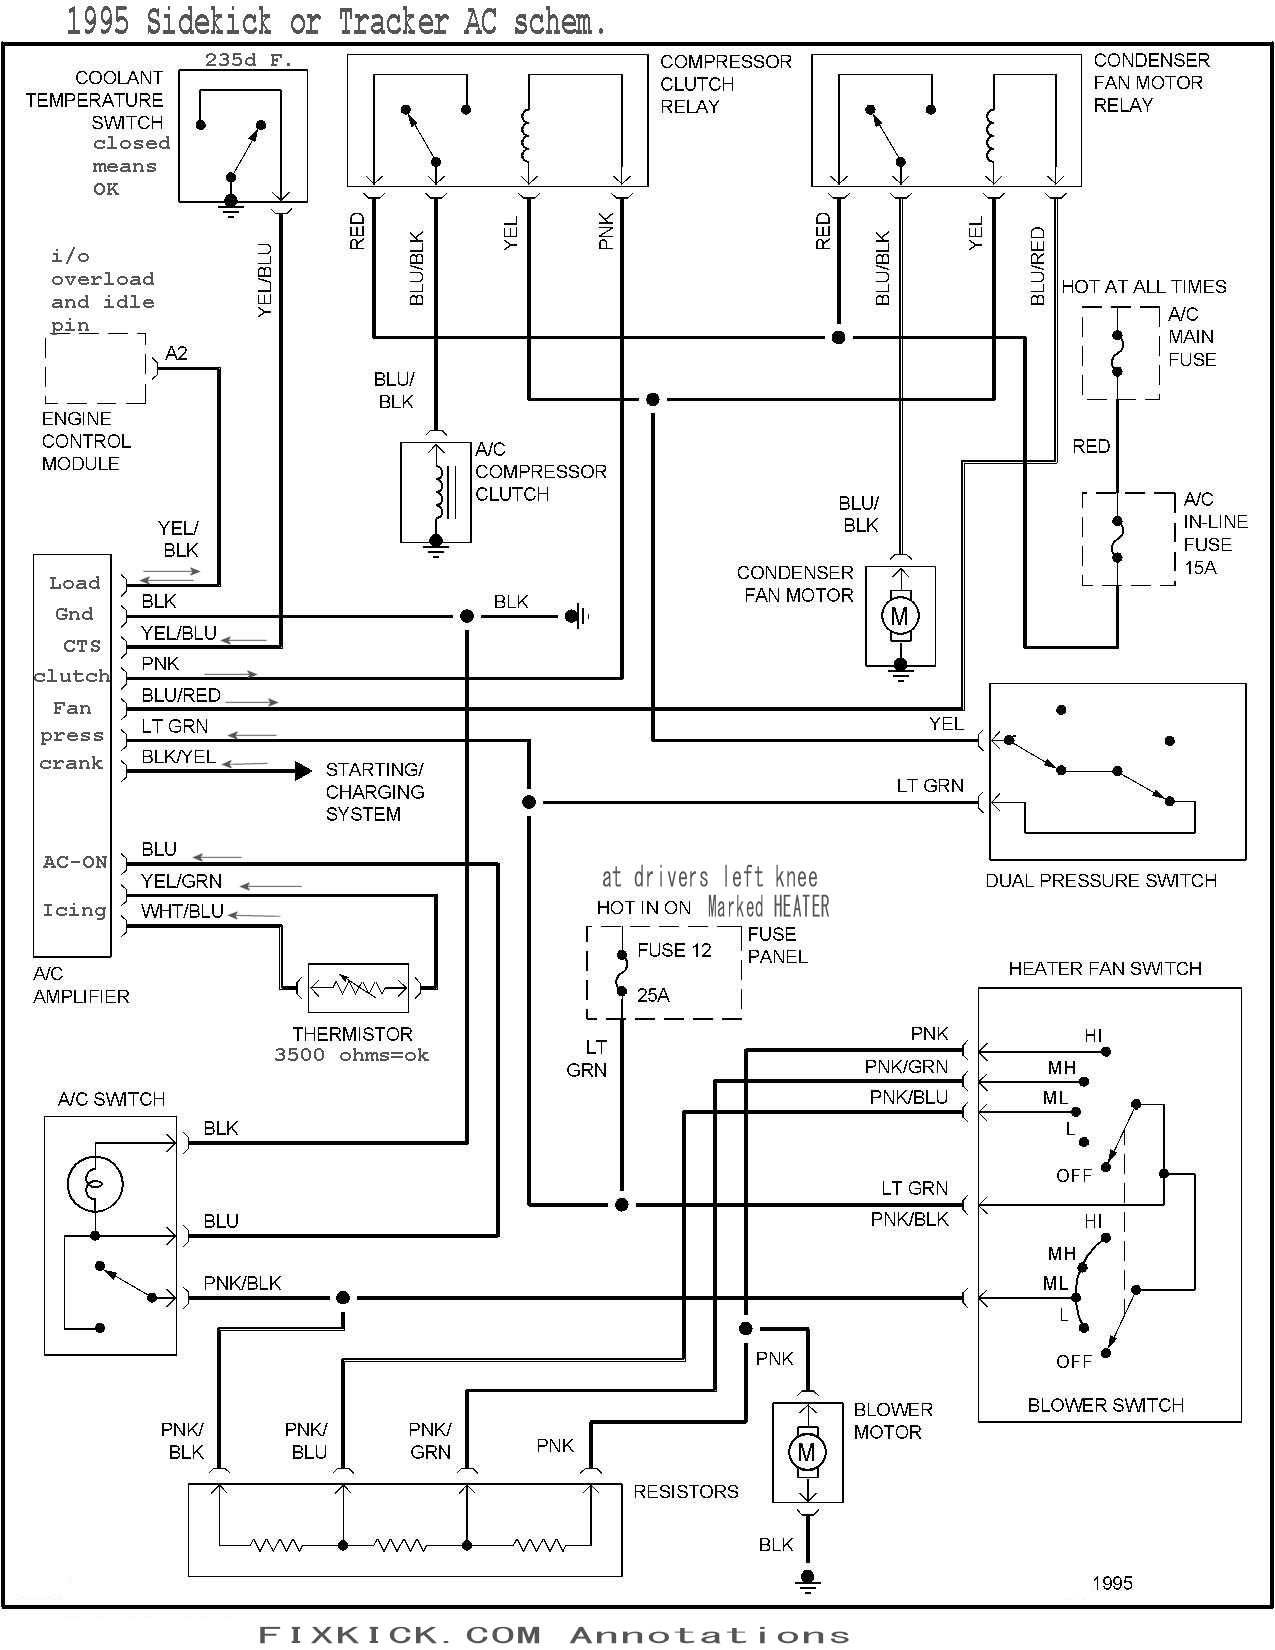 Schematic for 2002 Chevy Tracker Evap System Diagram Factory Air Conditioning – Diagnosis and Repair Of Schematic for 2002 Chevy Tracker Evap System Diagram